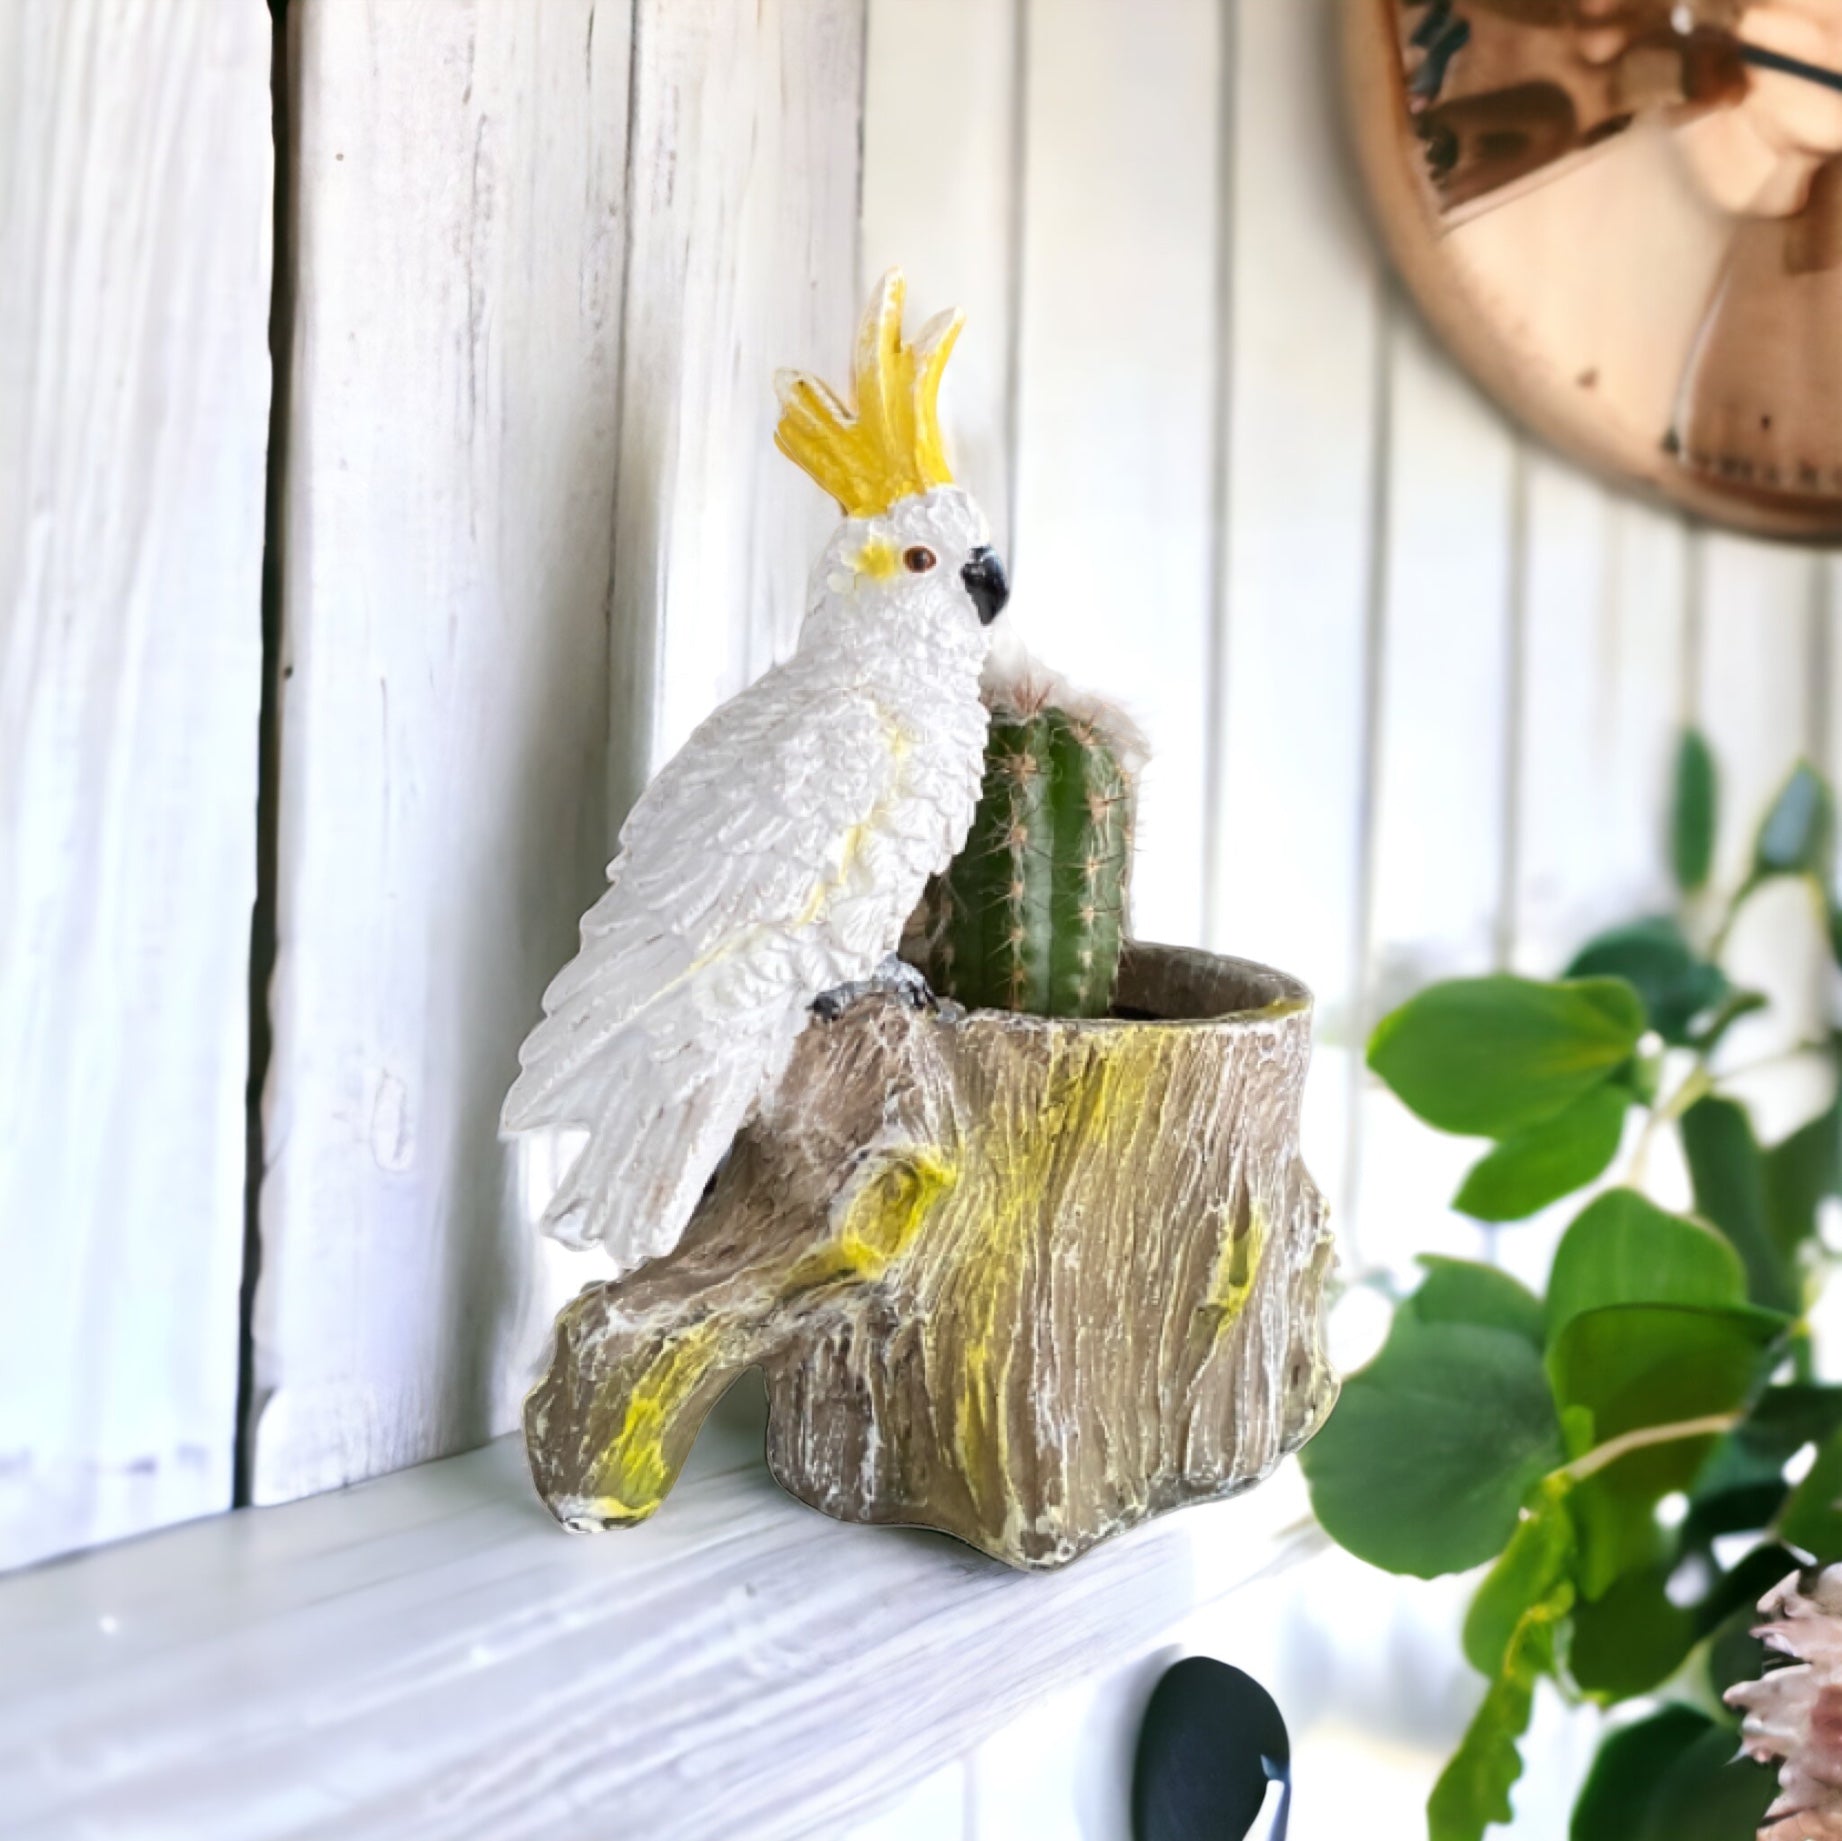 Plant Pot Planter Cockatoo - The Renmy Store Homewares & Gifts 